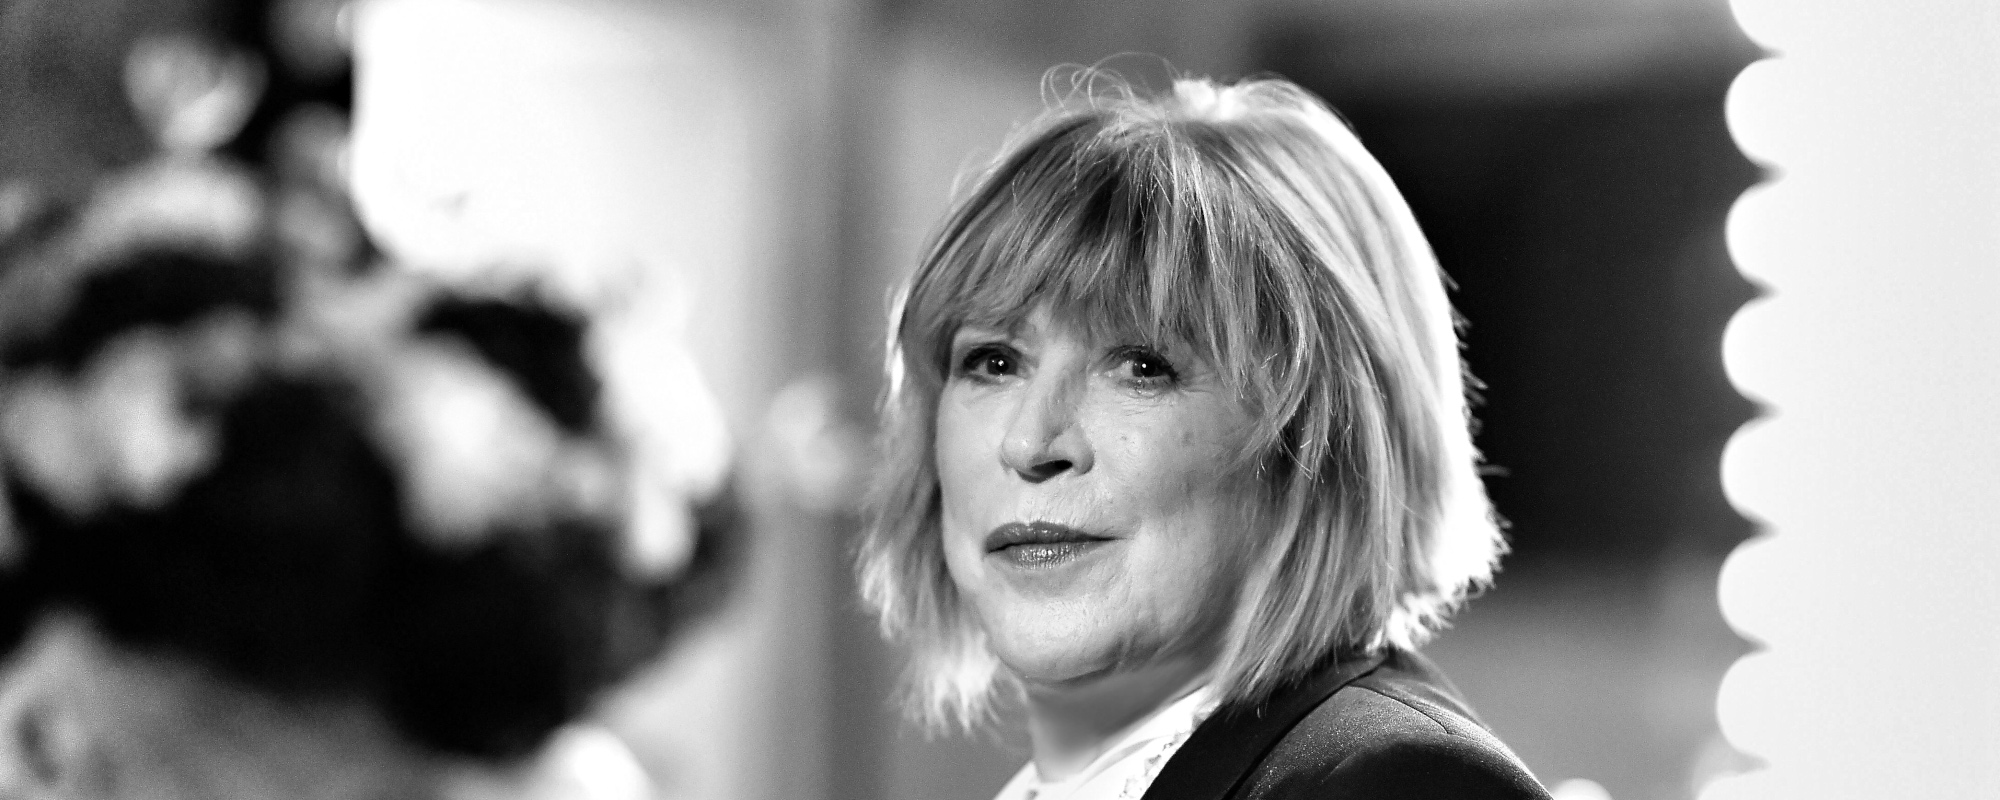 Review: This Powerful Tribute to Marianne Faithfull Reveals the Diversity of Her Extensive Career